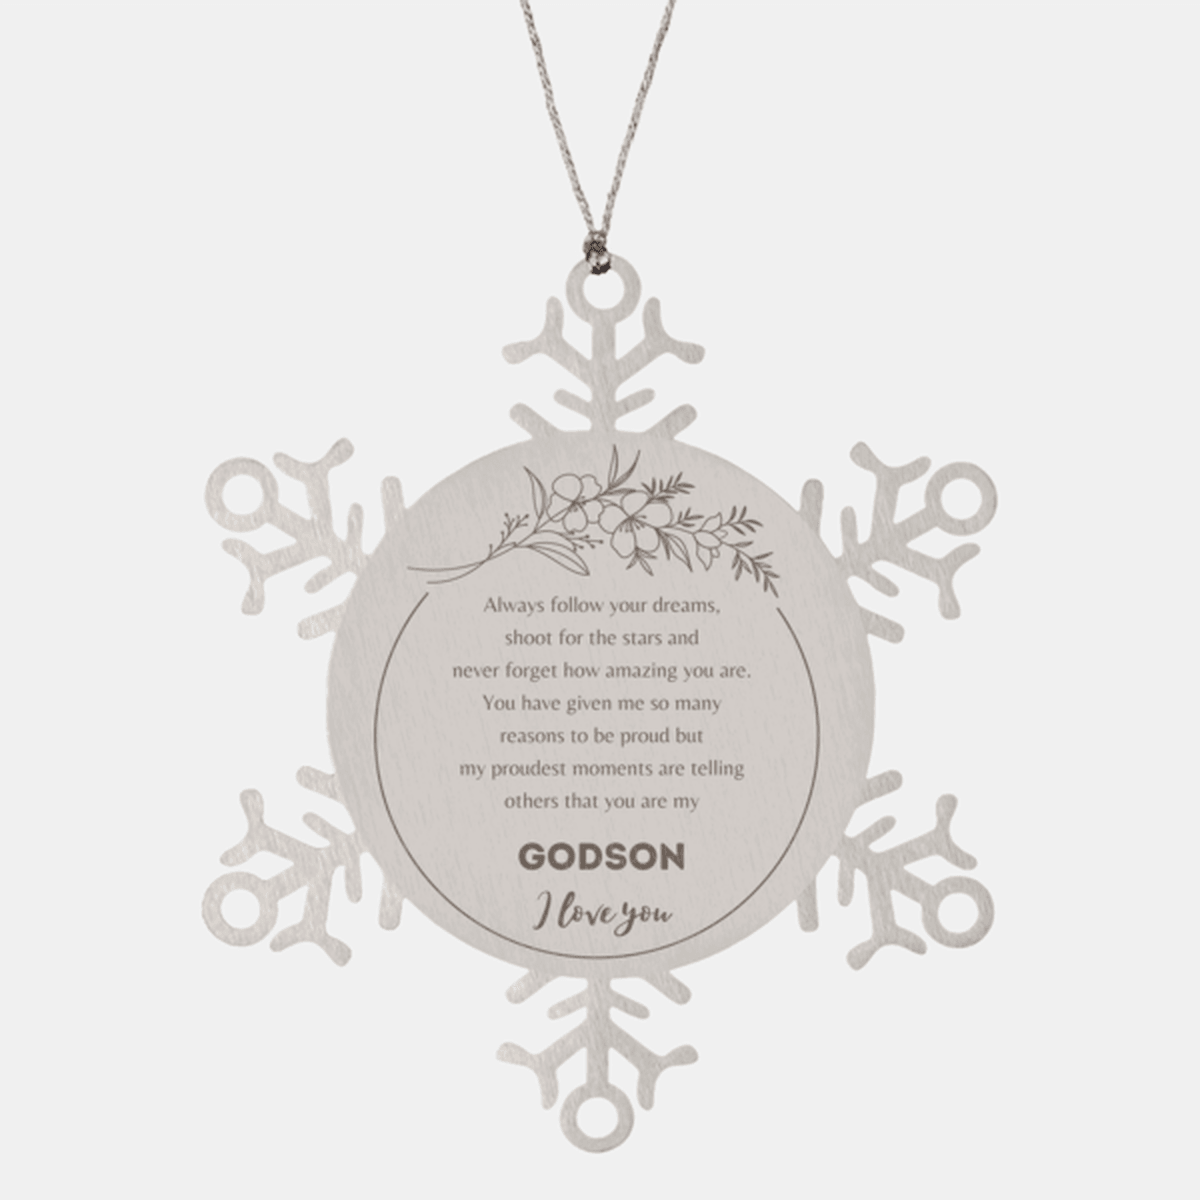 Snowflake Ornament for Godson Present, Godson Always follow your dreams, never forget how amazing you are, Godson Christmas Gifts Decorations for Girls Boys Teen Men Women - Mallard Moon Gift Shop